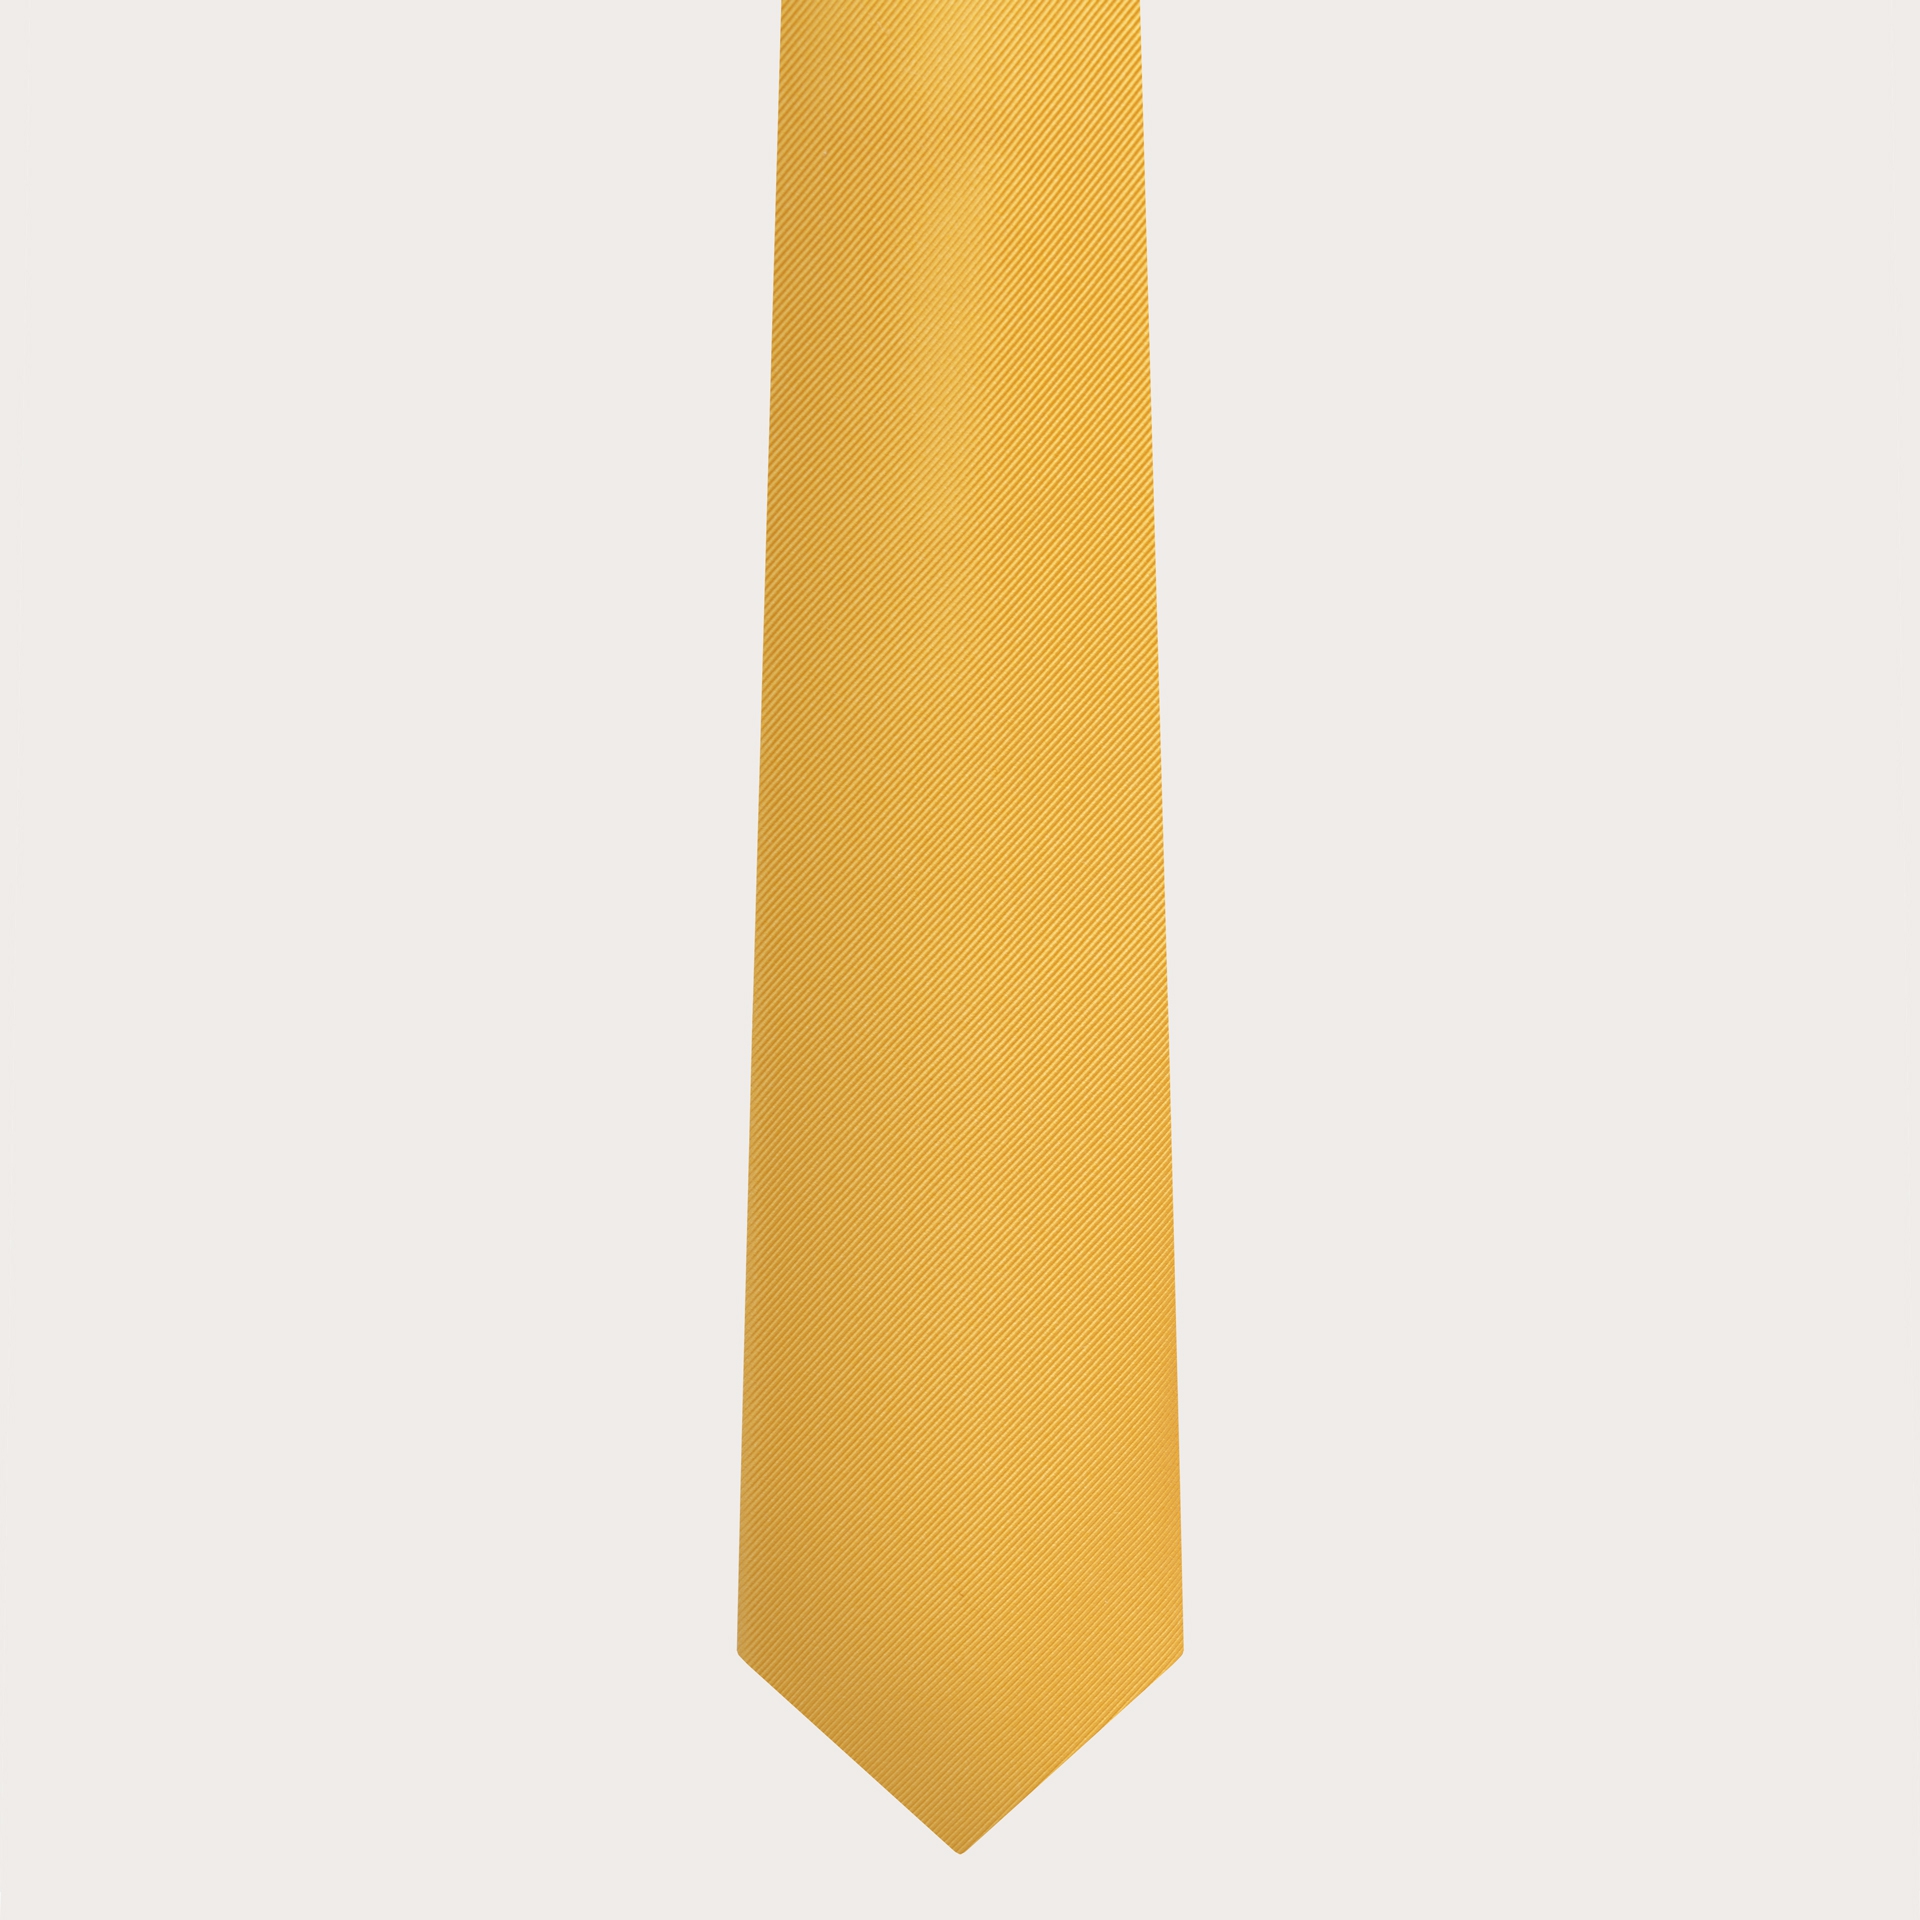 BRUCLE Yellow necktie in jacquard silk